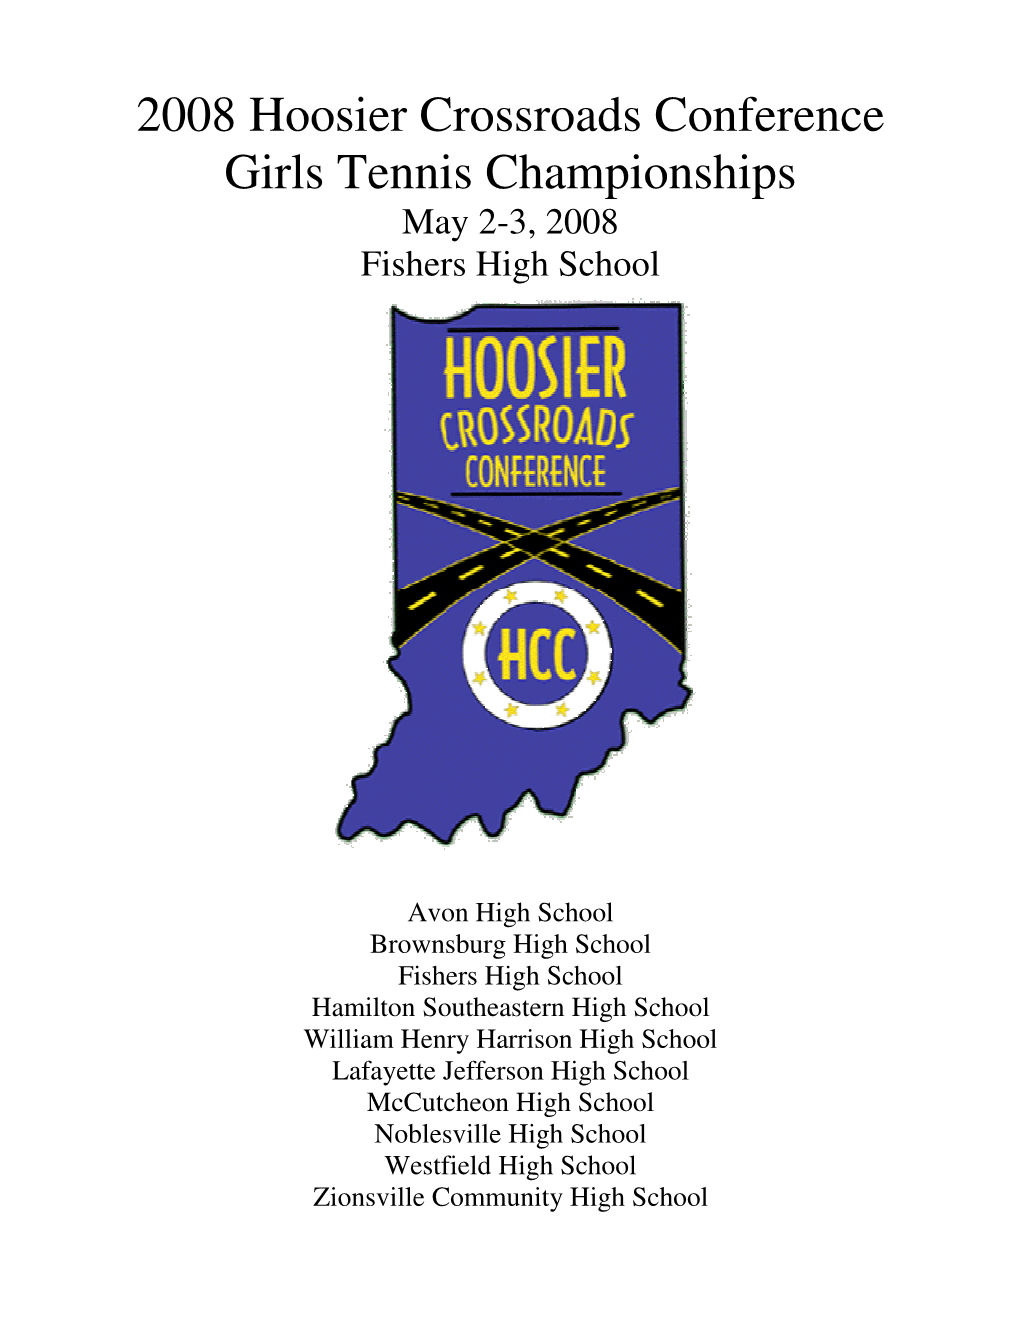 2008 Hoosier Crossroads Conference Girls Tennis Championships May 2-3, 2008 Fishers High School